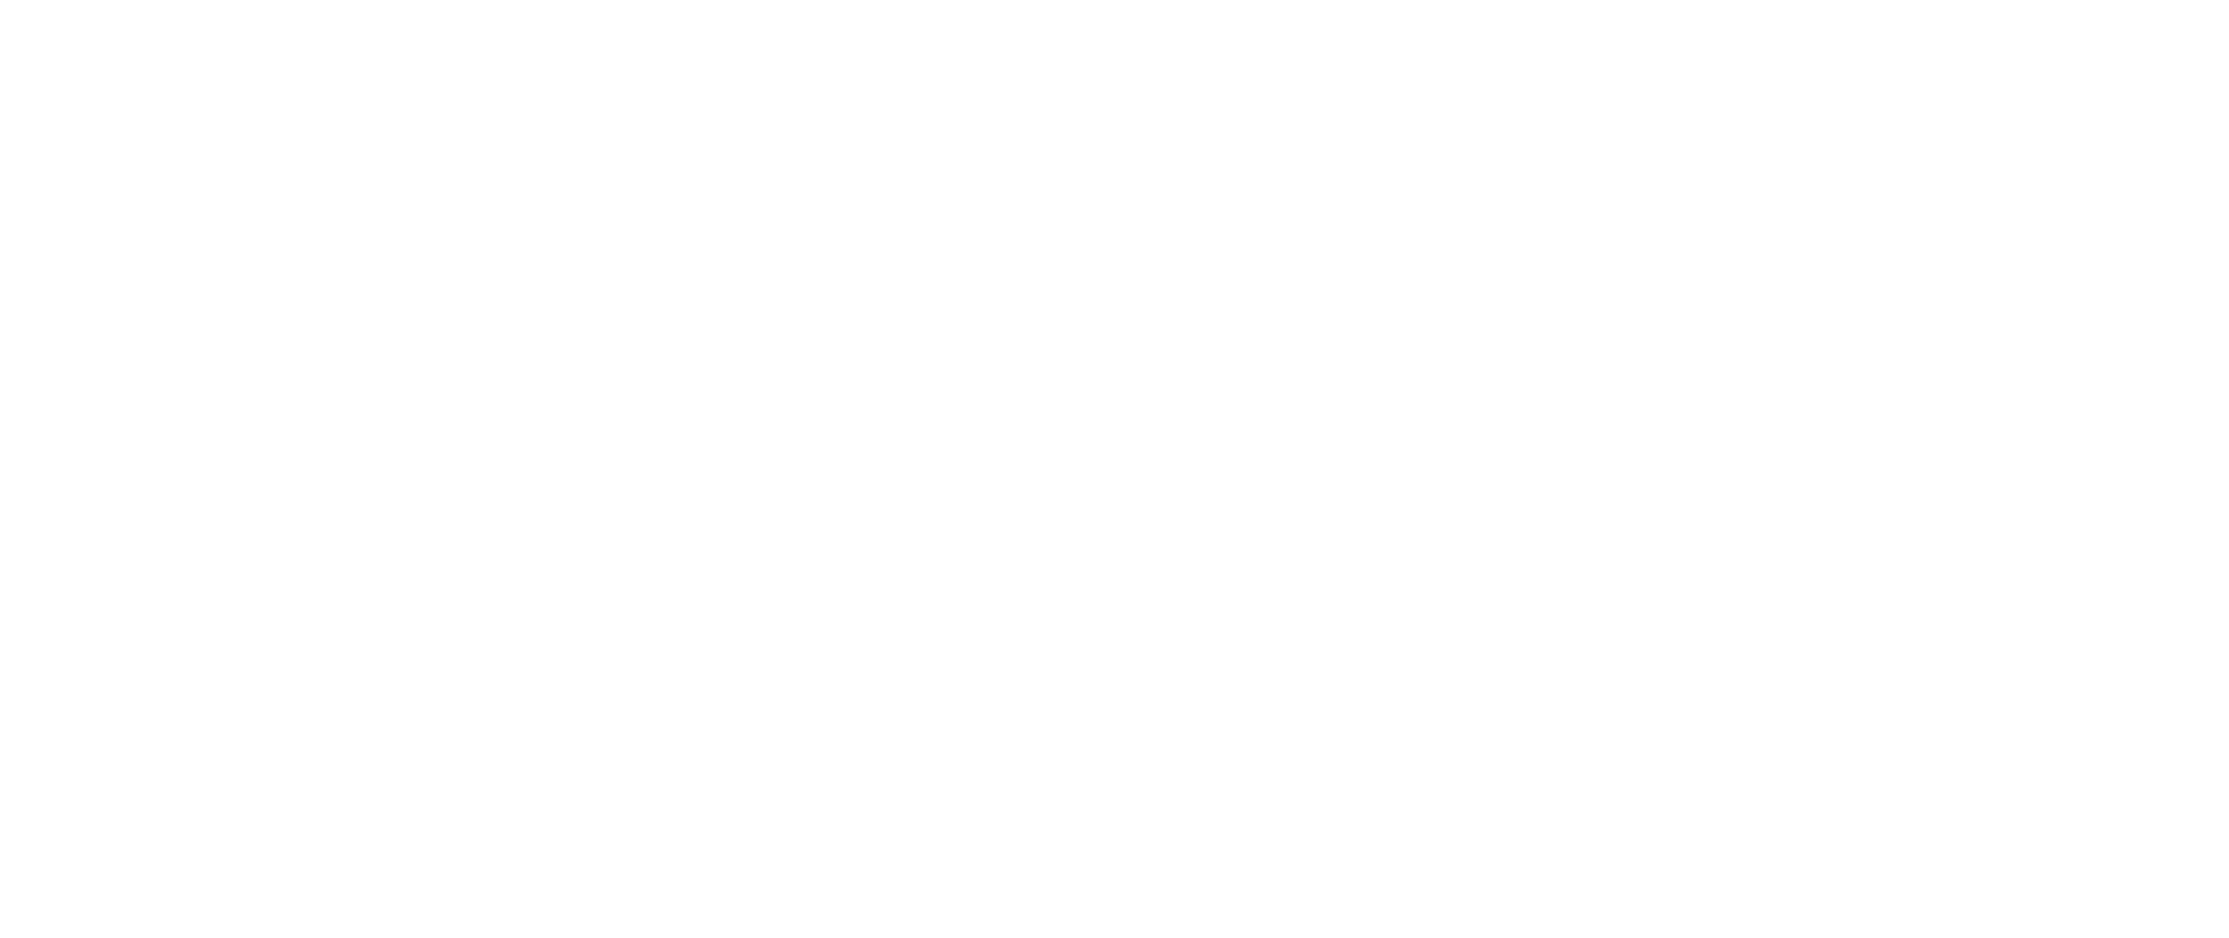 simple meaning of critical thinking